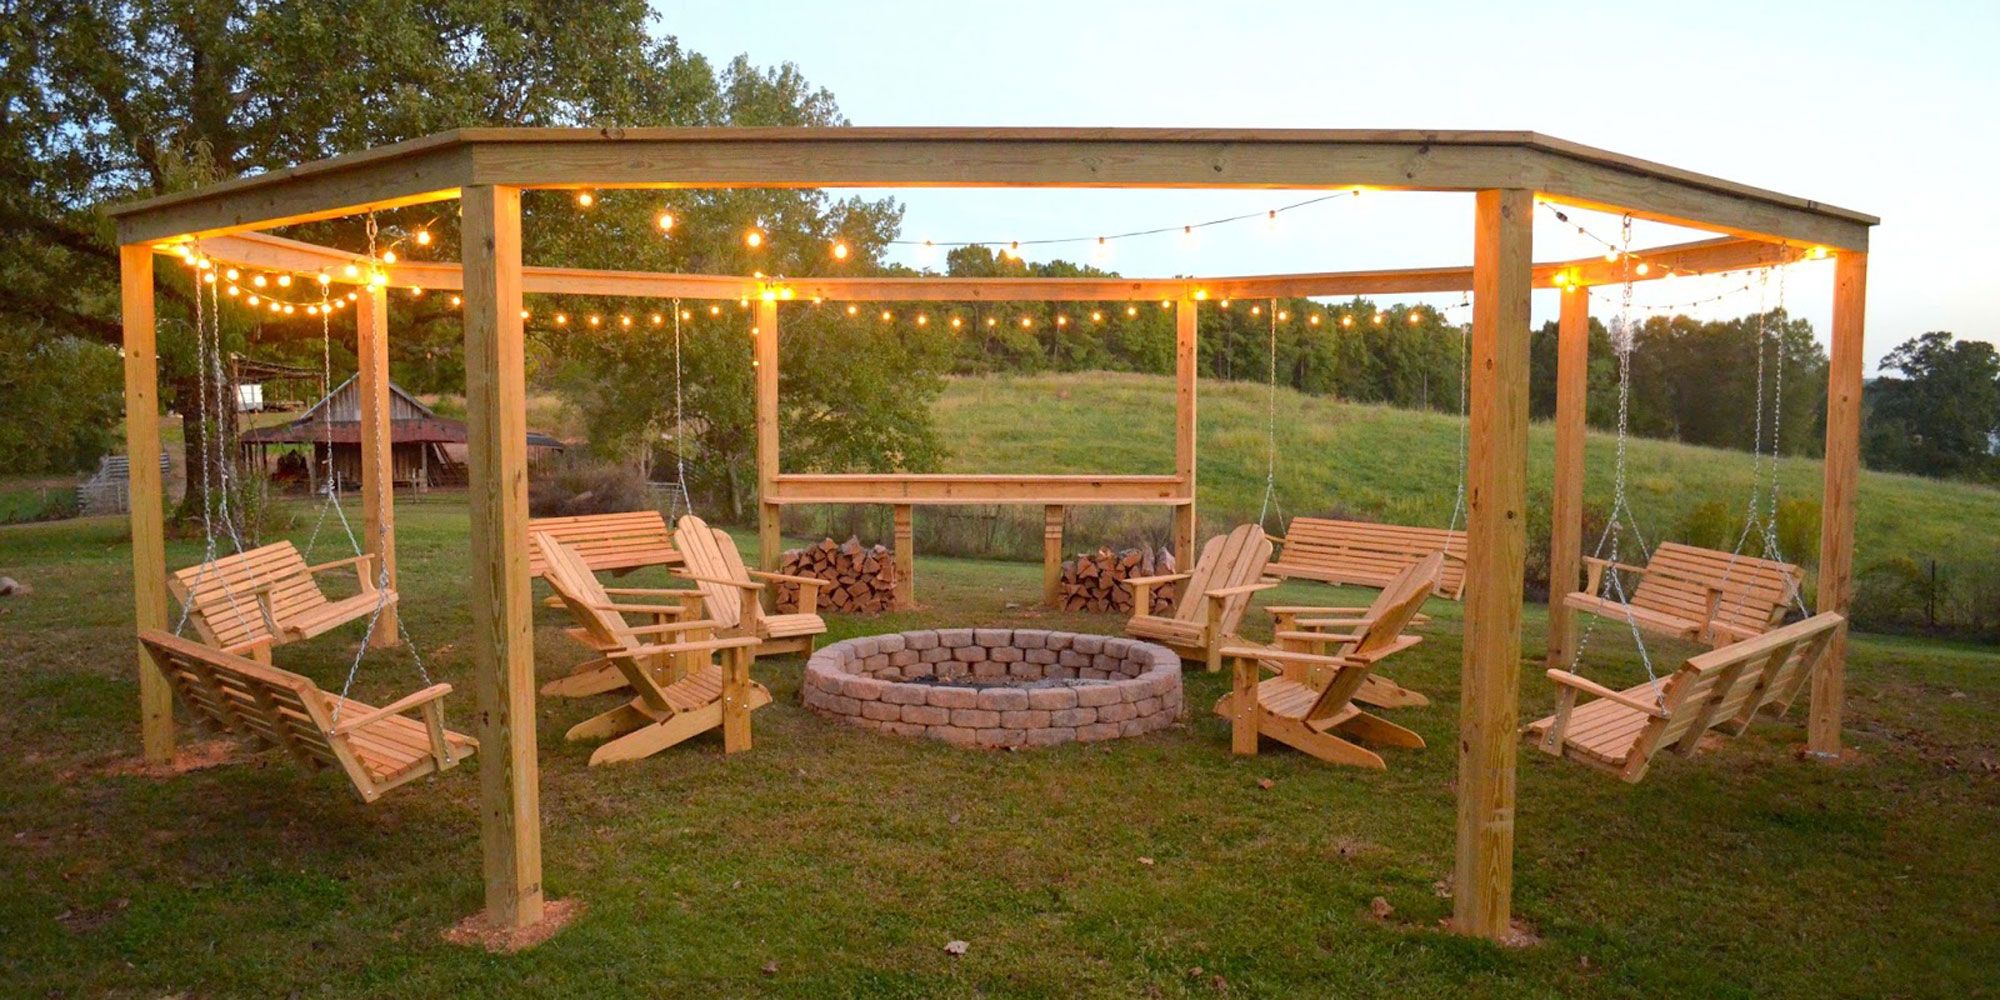 This Diy Backyard Pergola Is The, How To Make Patio Fire Pit